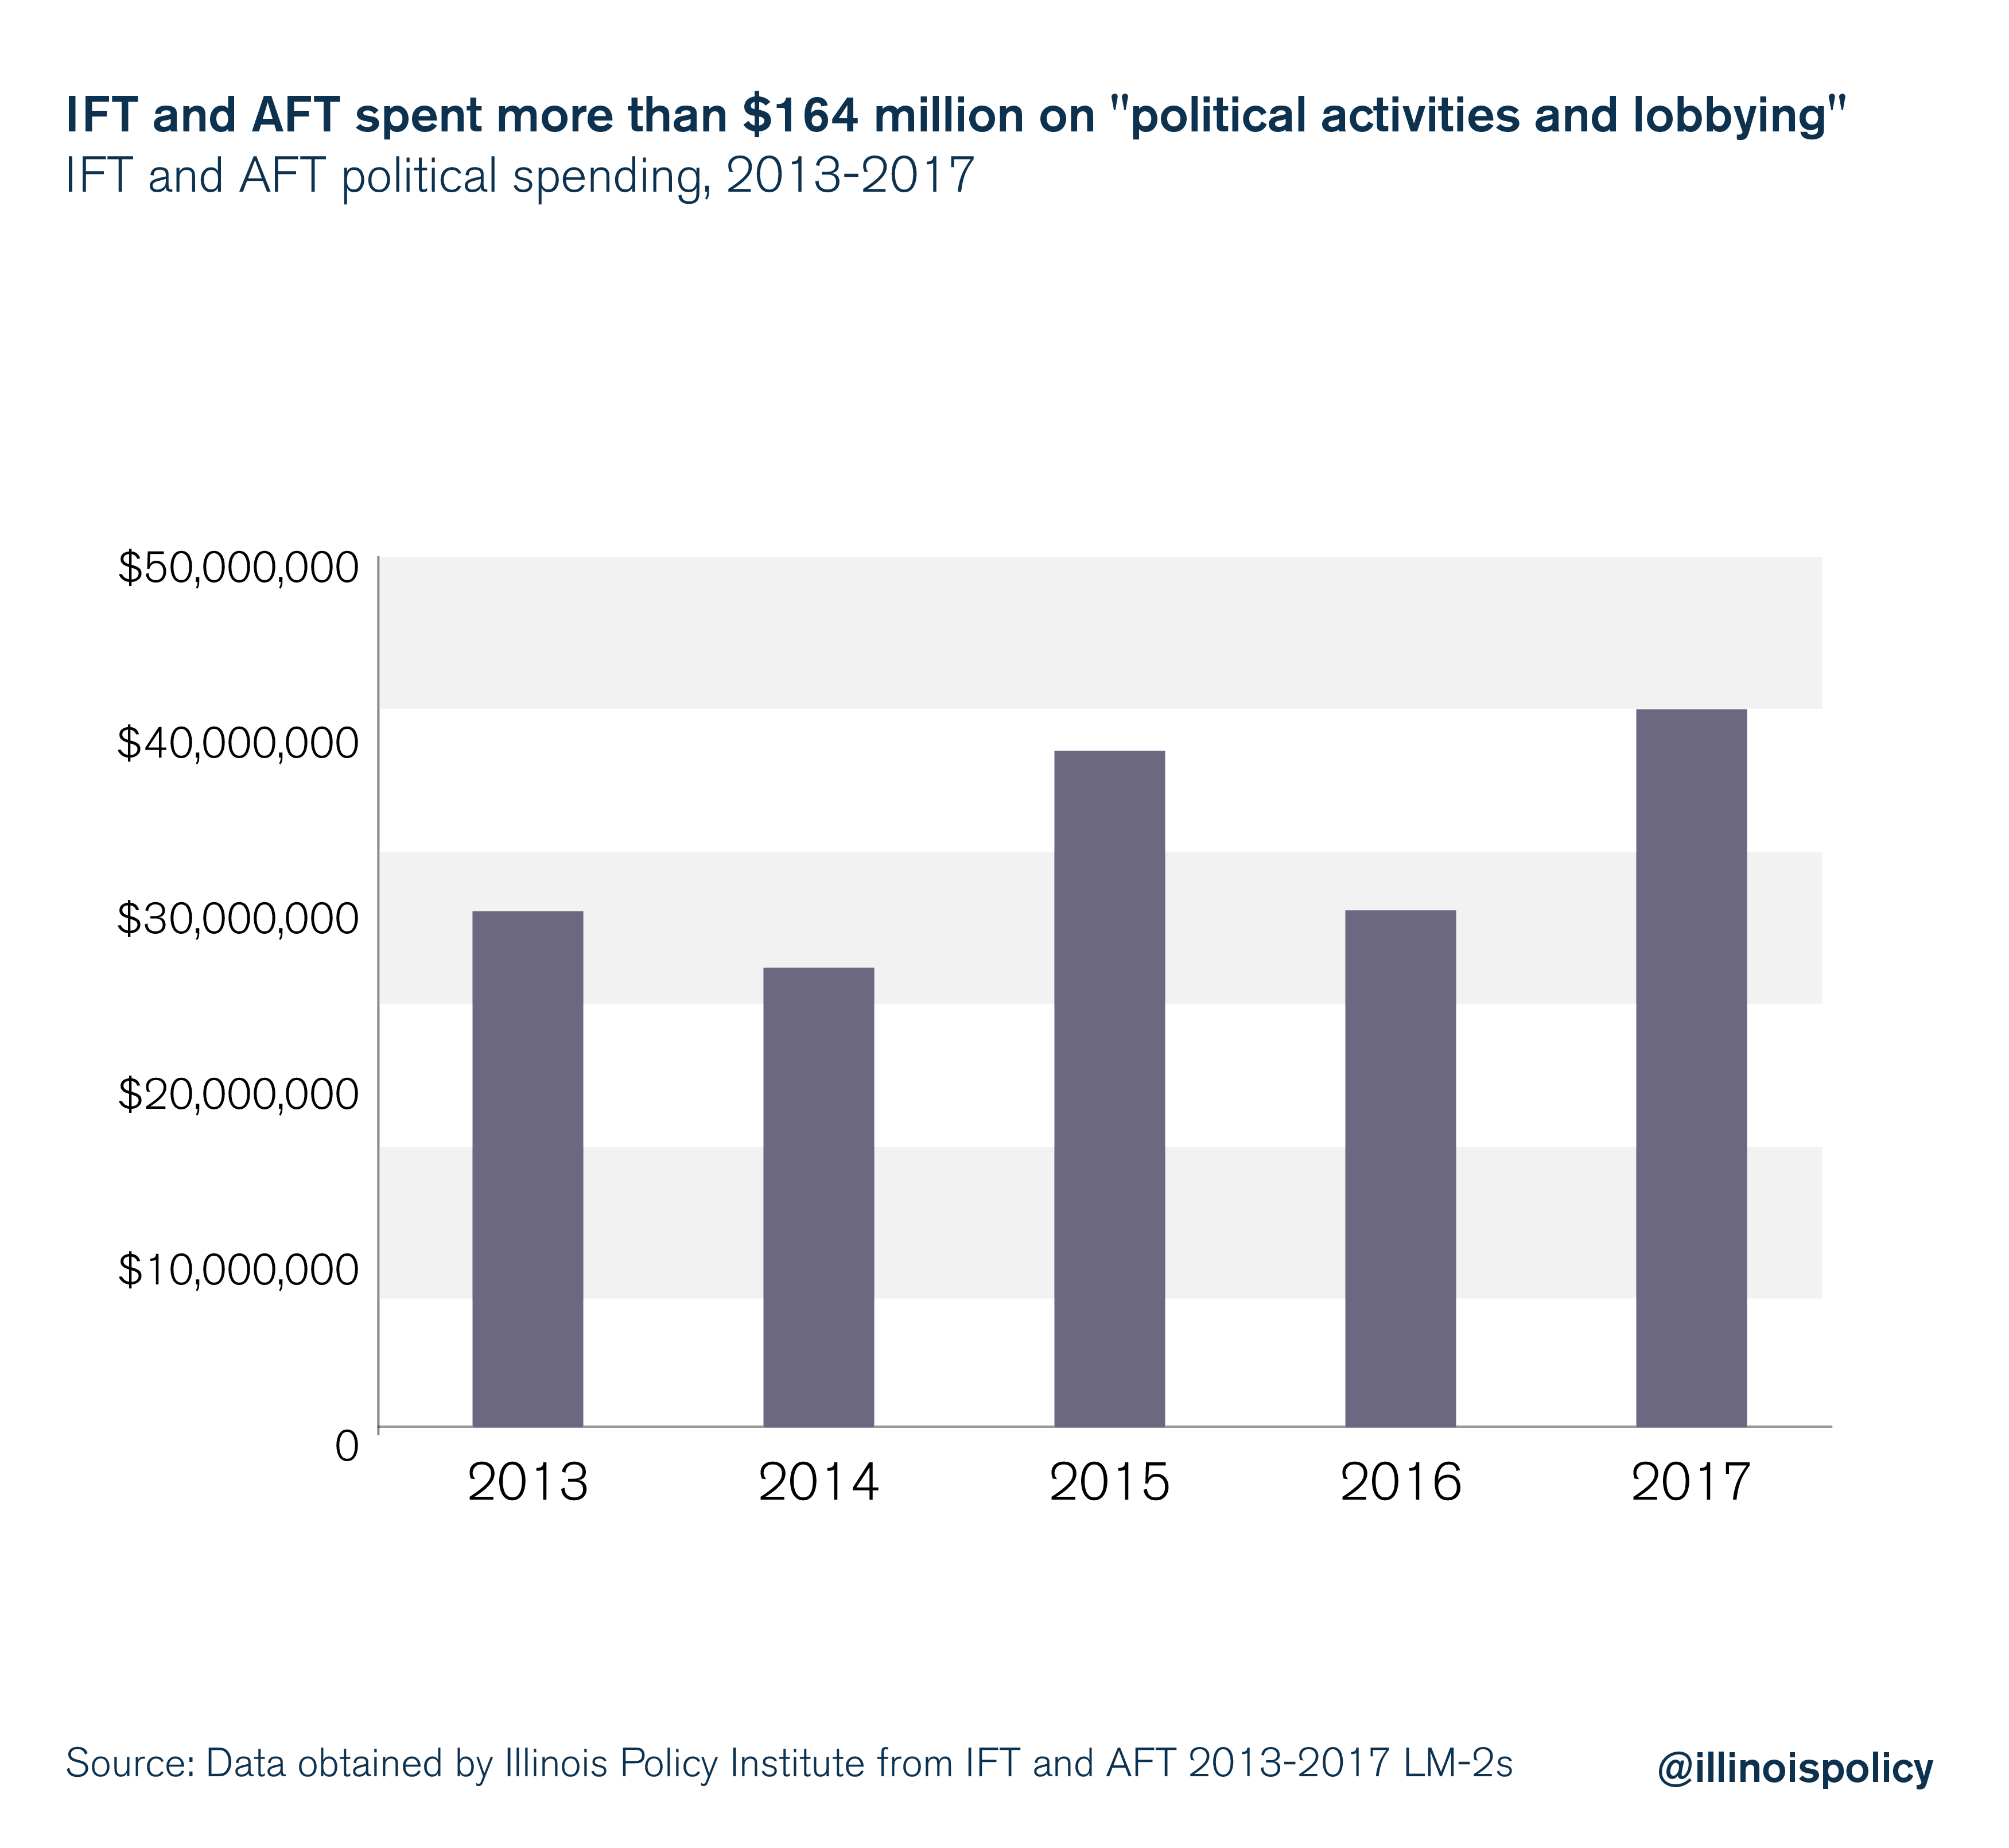 IFT and AFT spent more than $164 million on "political activities and lobbying"